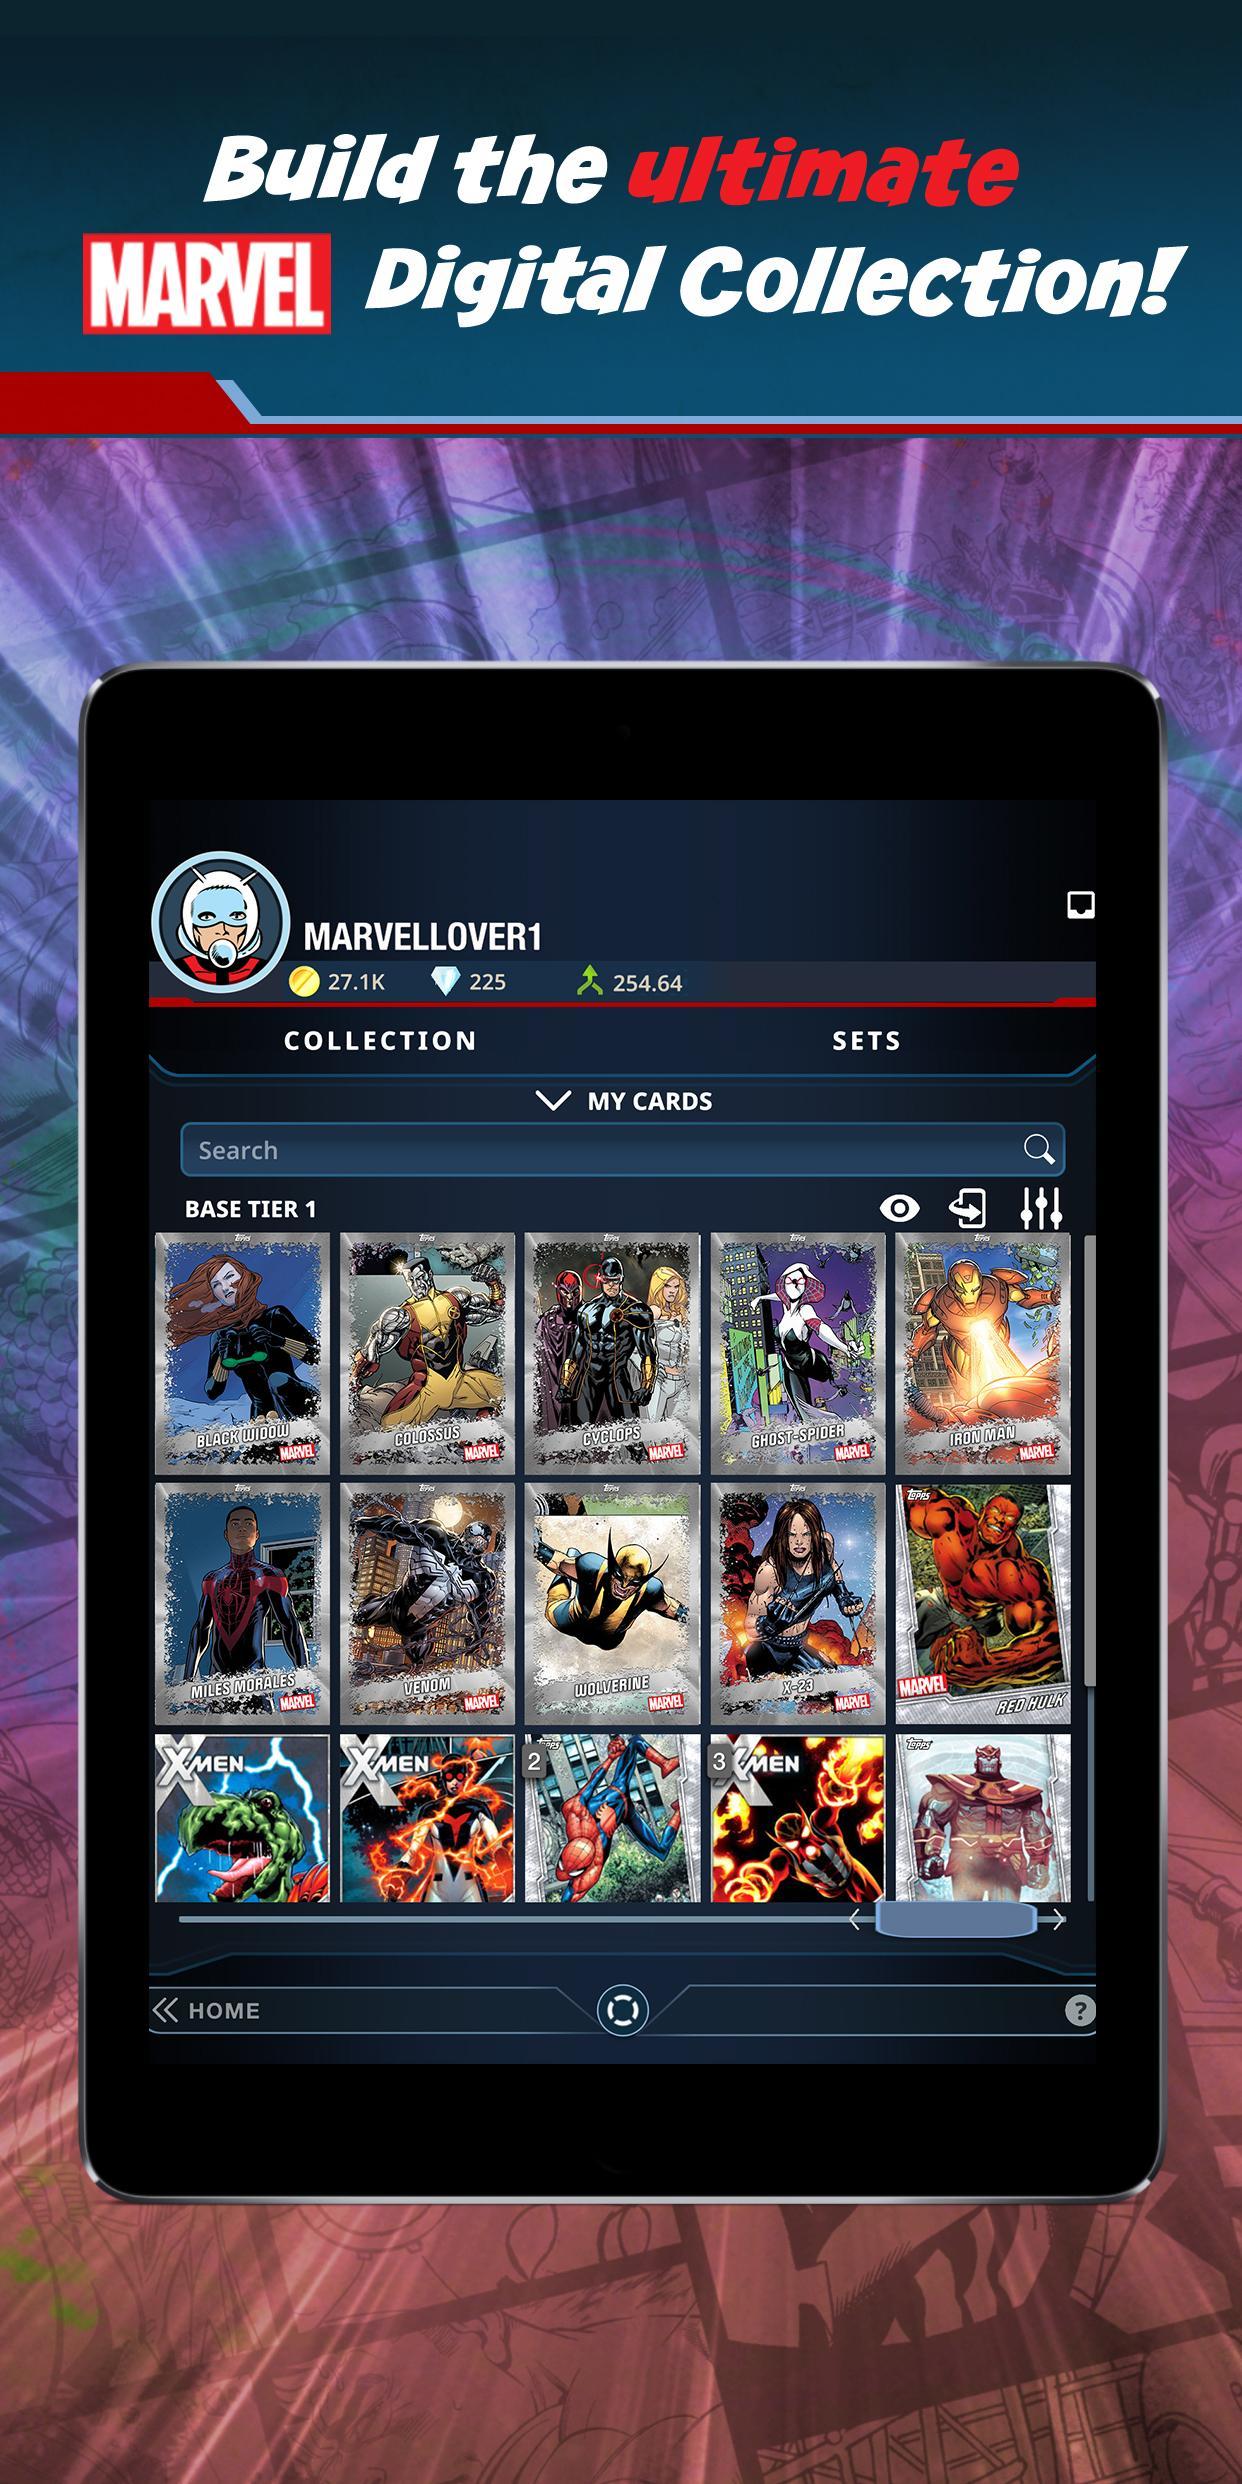 Marvel Collect! by Topps Card Trader 14.0.0 Screenshot 17